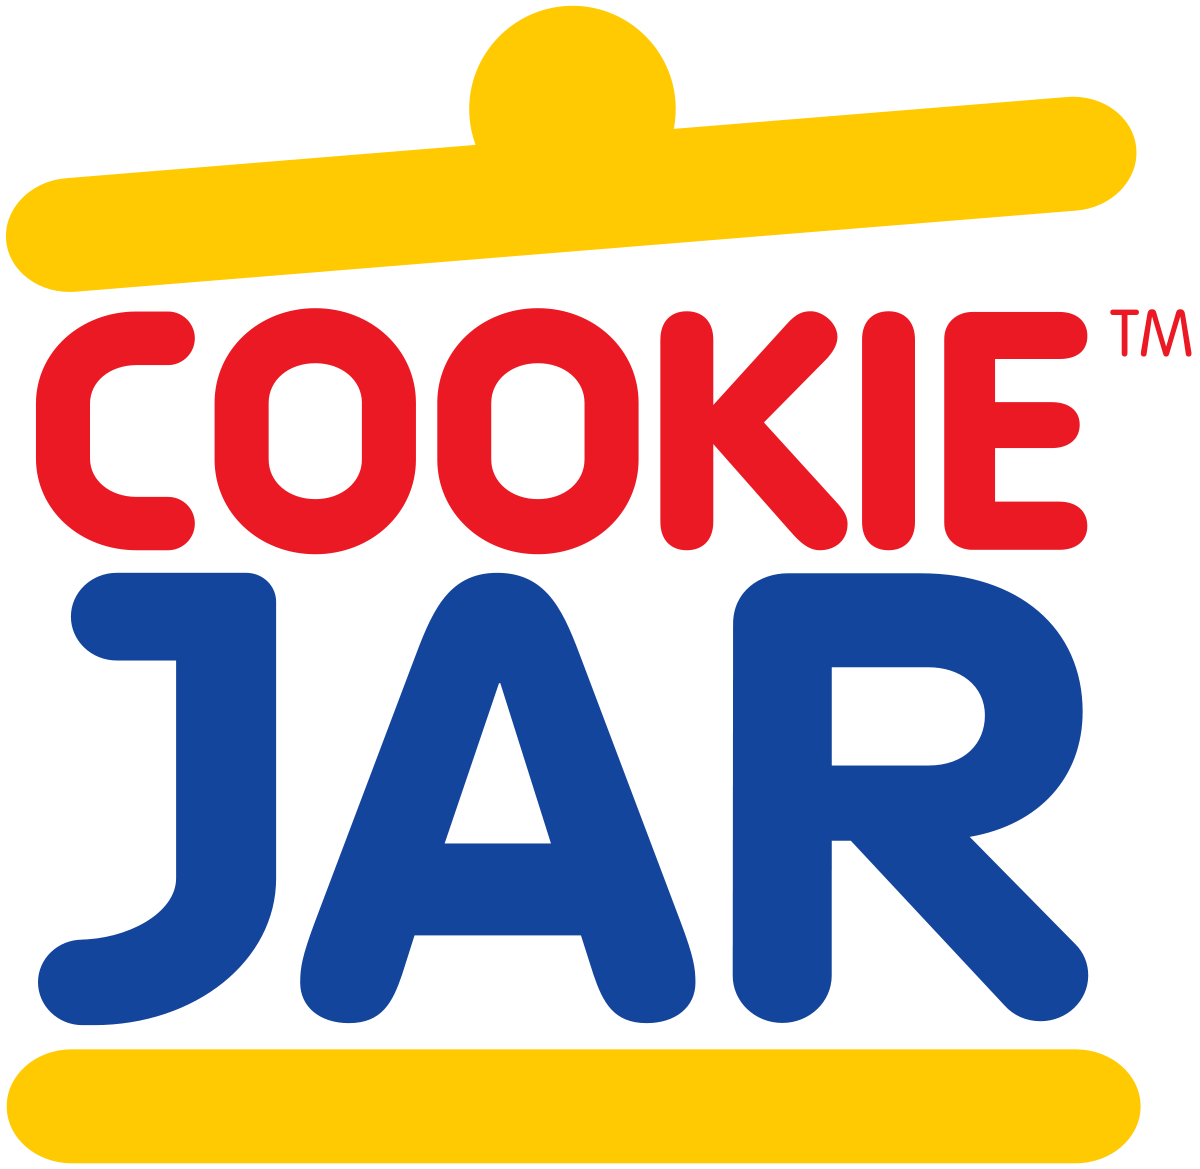 Logo clipart cookie. Jar group wikipedia 